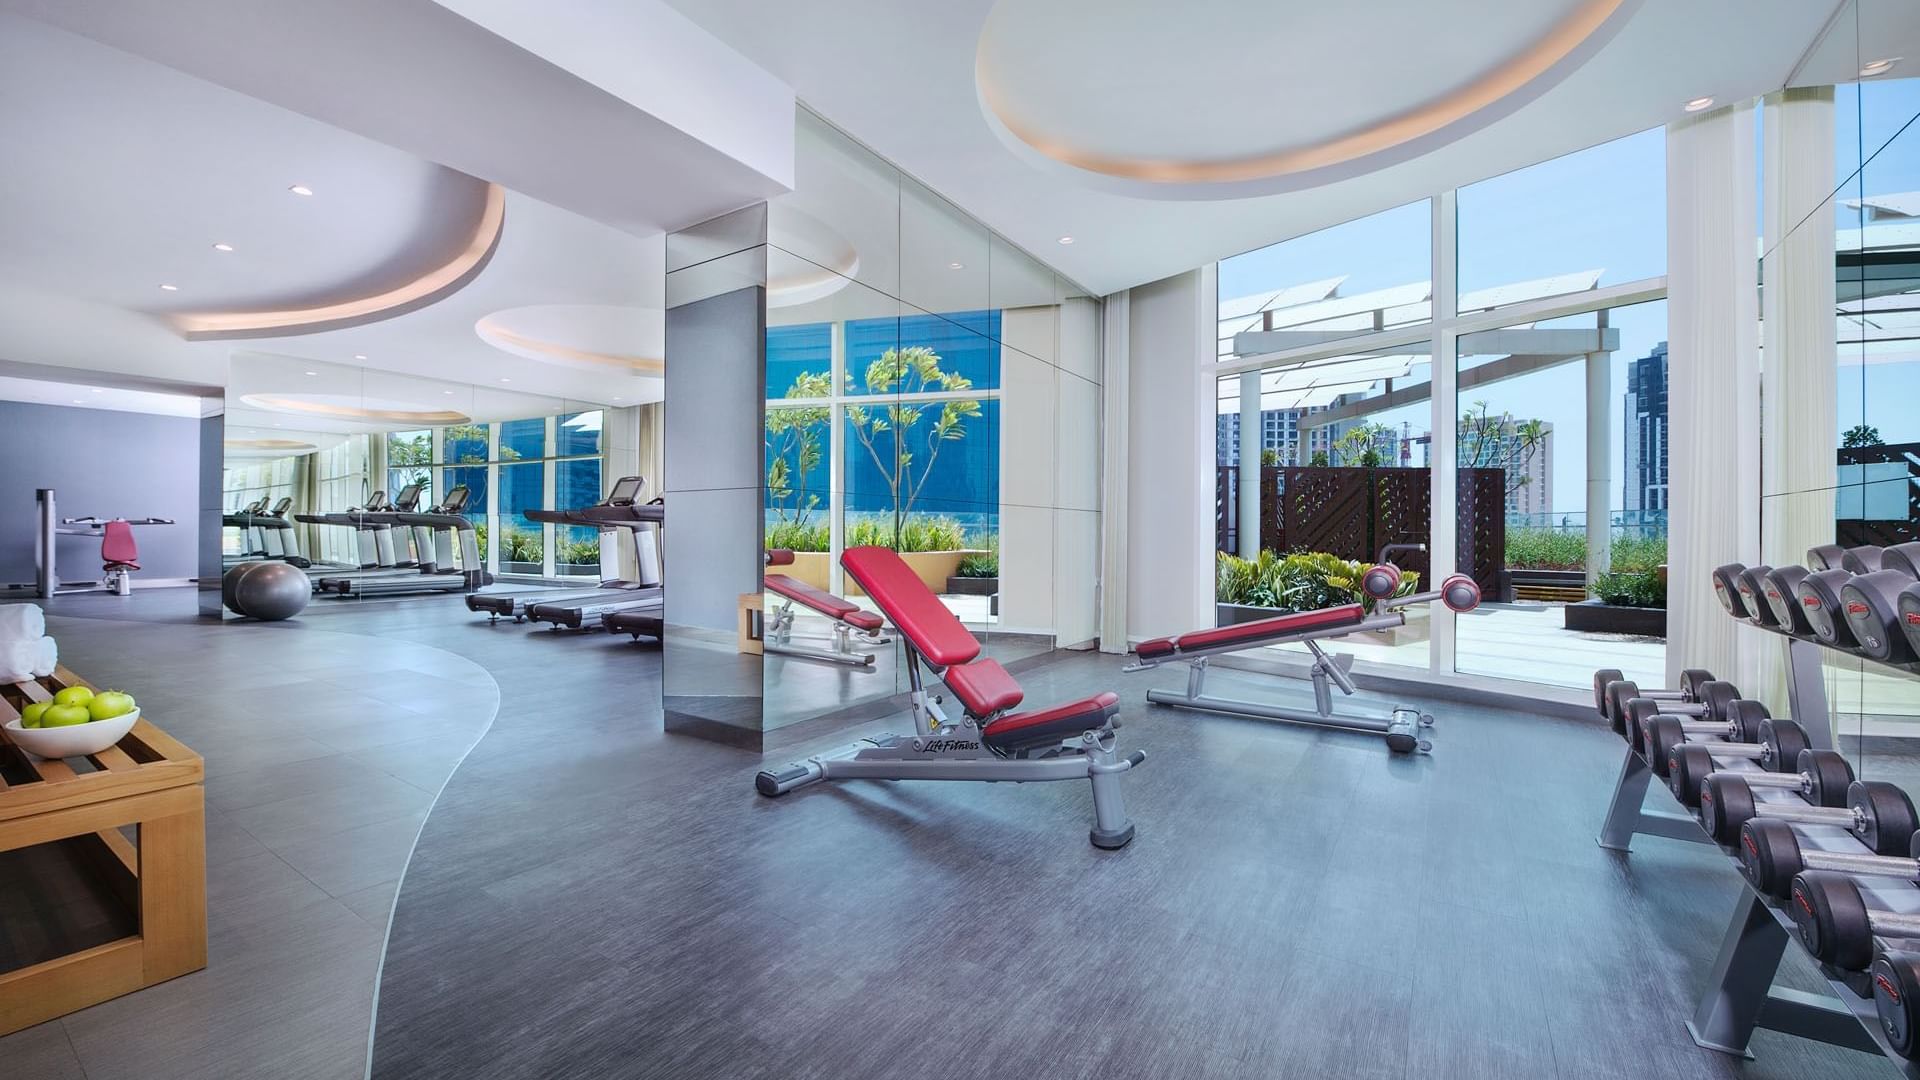 A well-lit gym room with various exercise equipment by the large windows in The Distinction Gym at DAMAC Maison Distinction